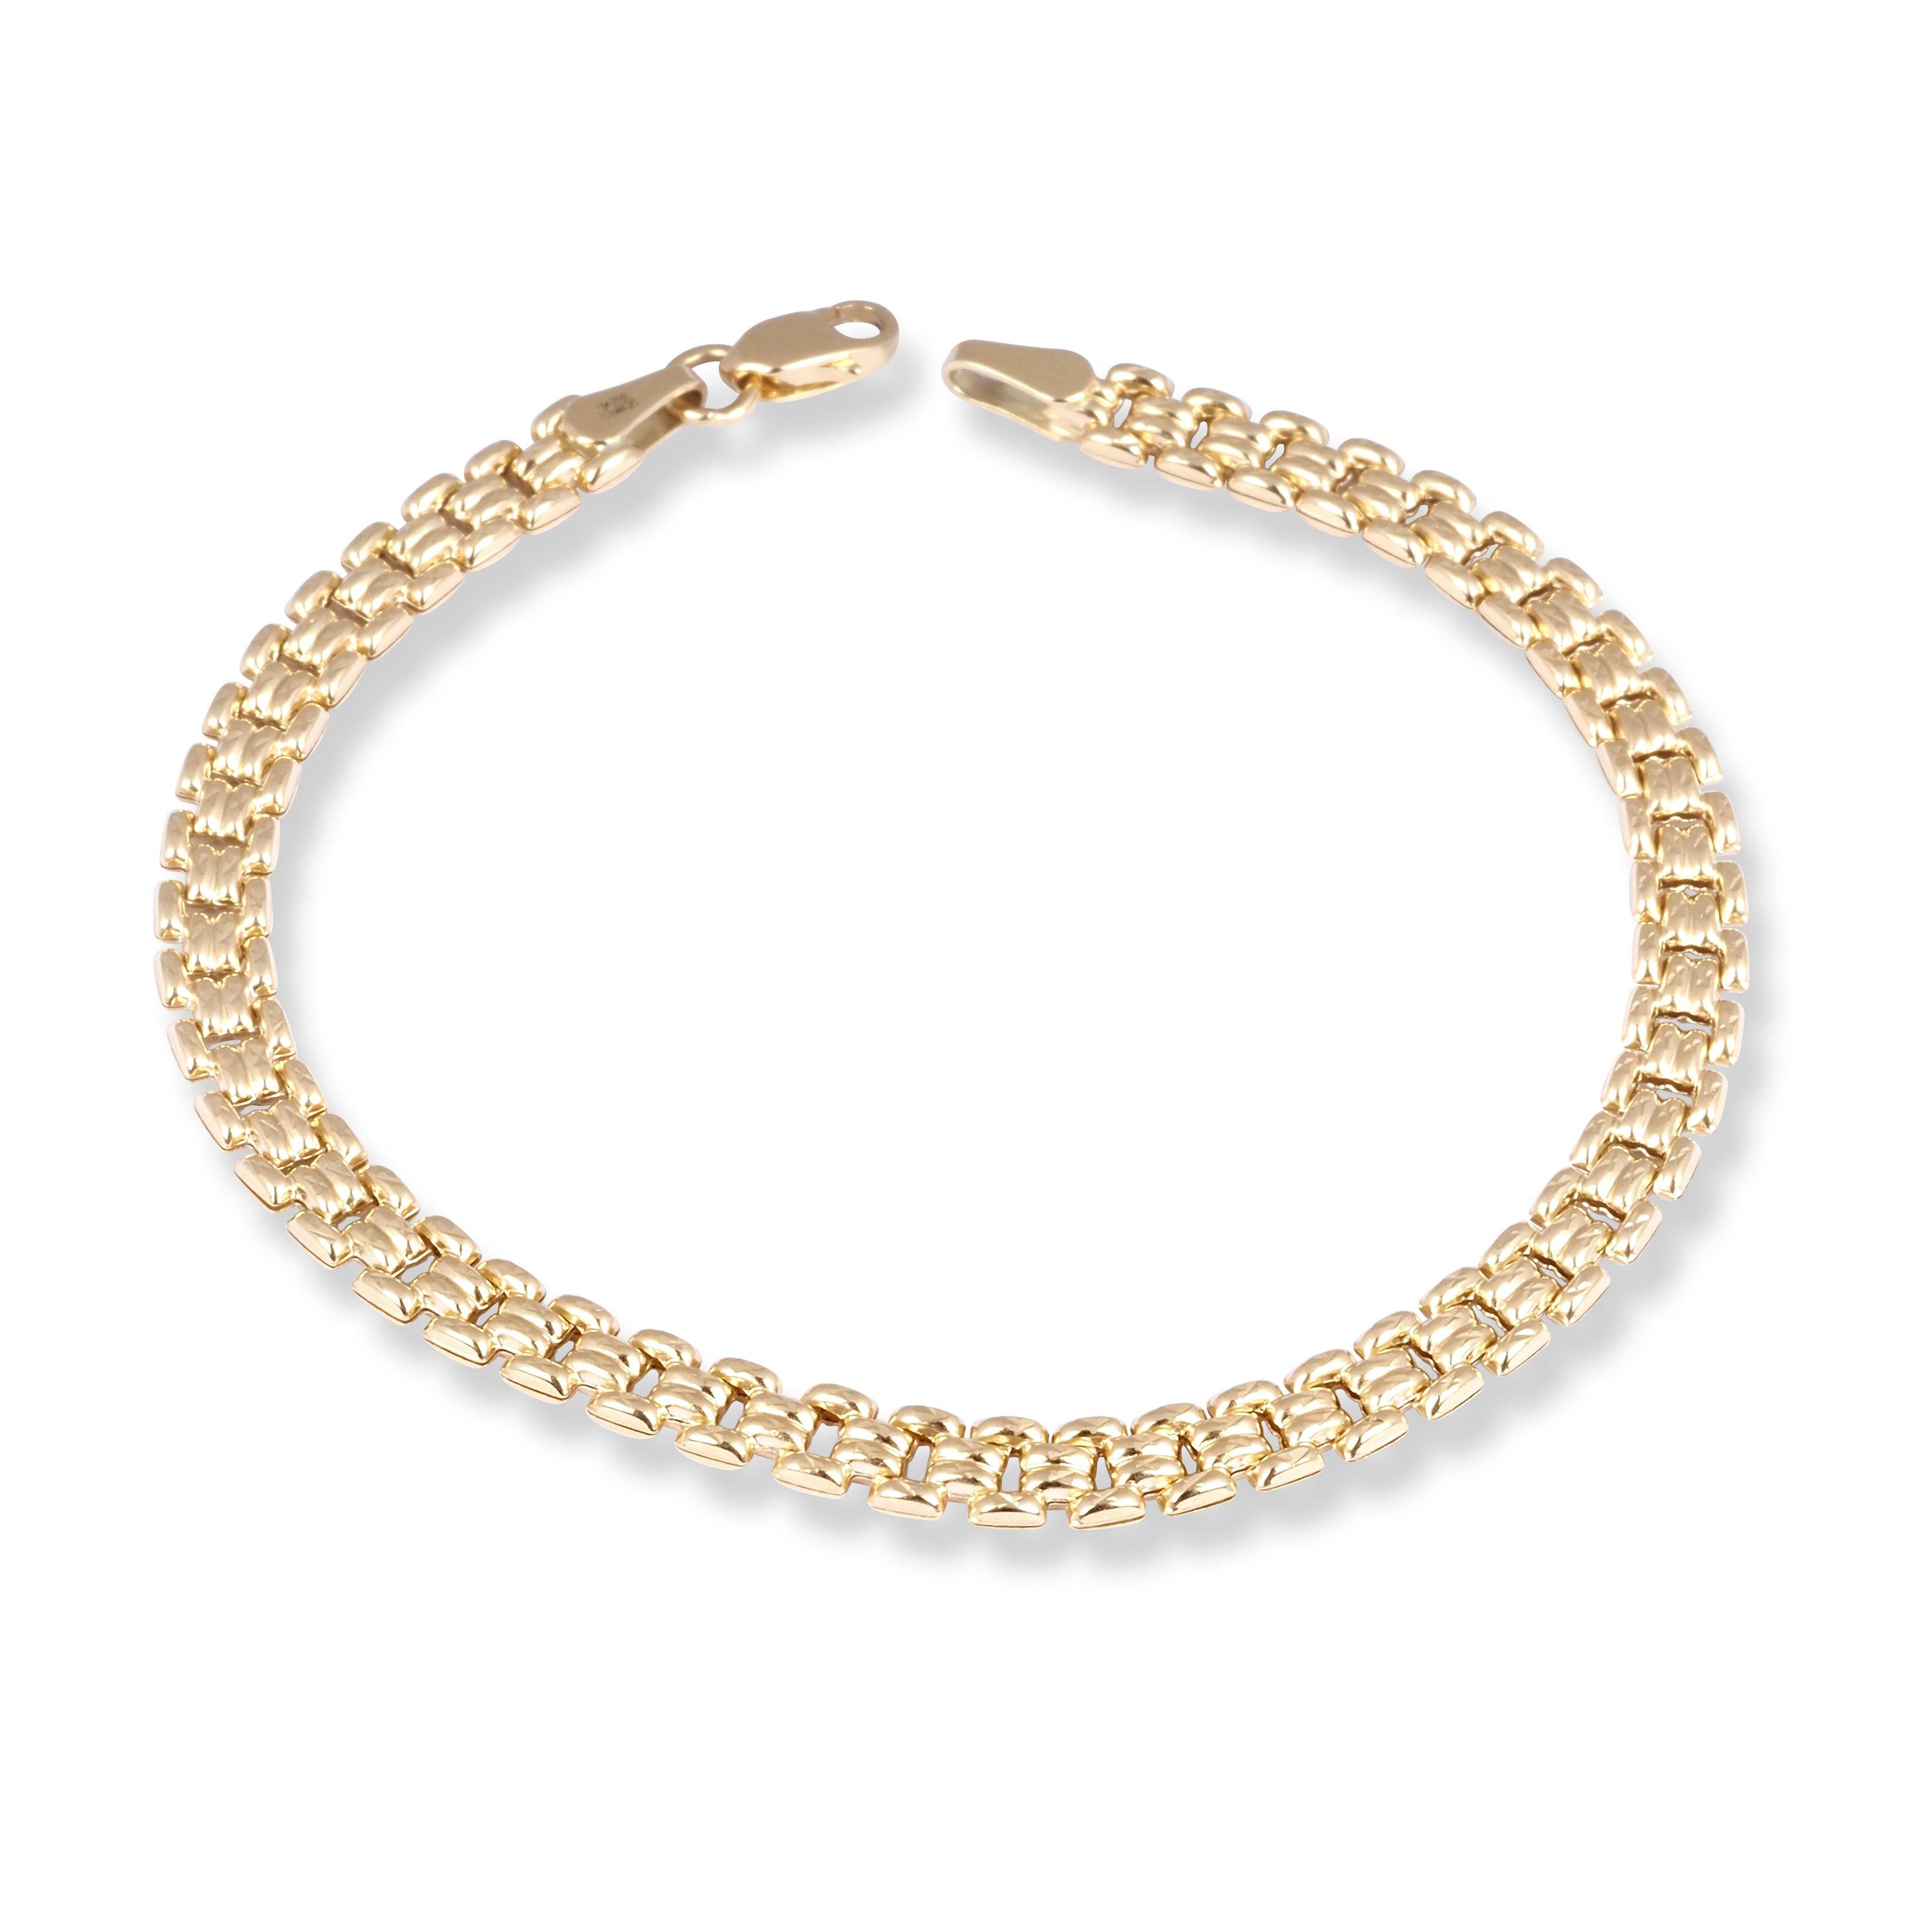 18ct Yellow Gold Flat Bracelet with Lobster Clasp LBR-8490 - Minar Jewellers